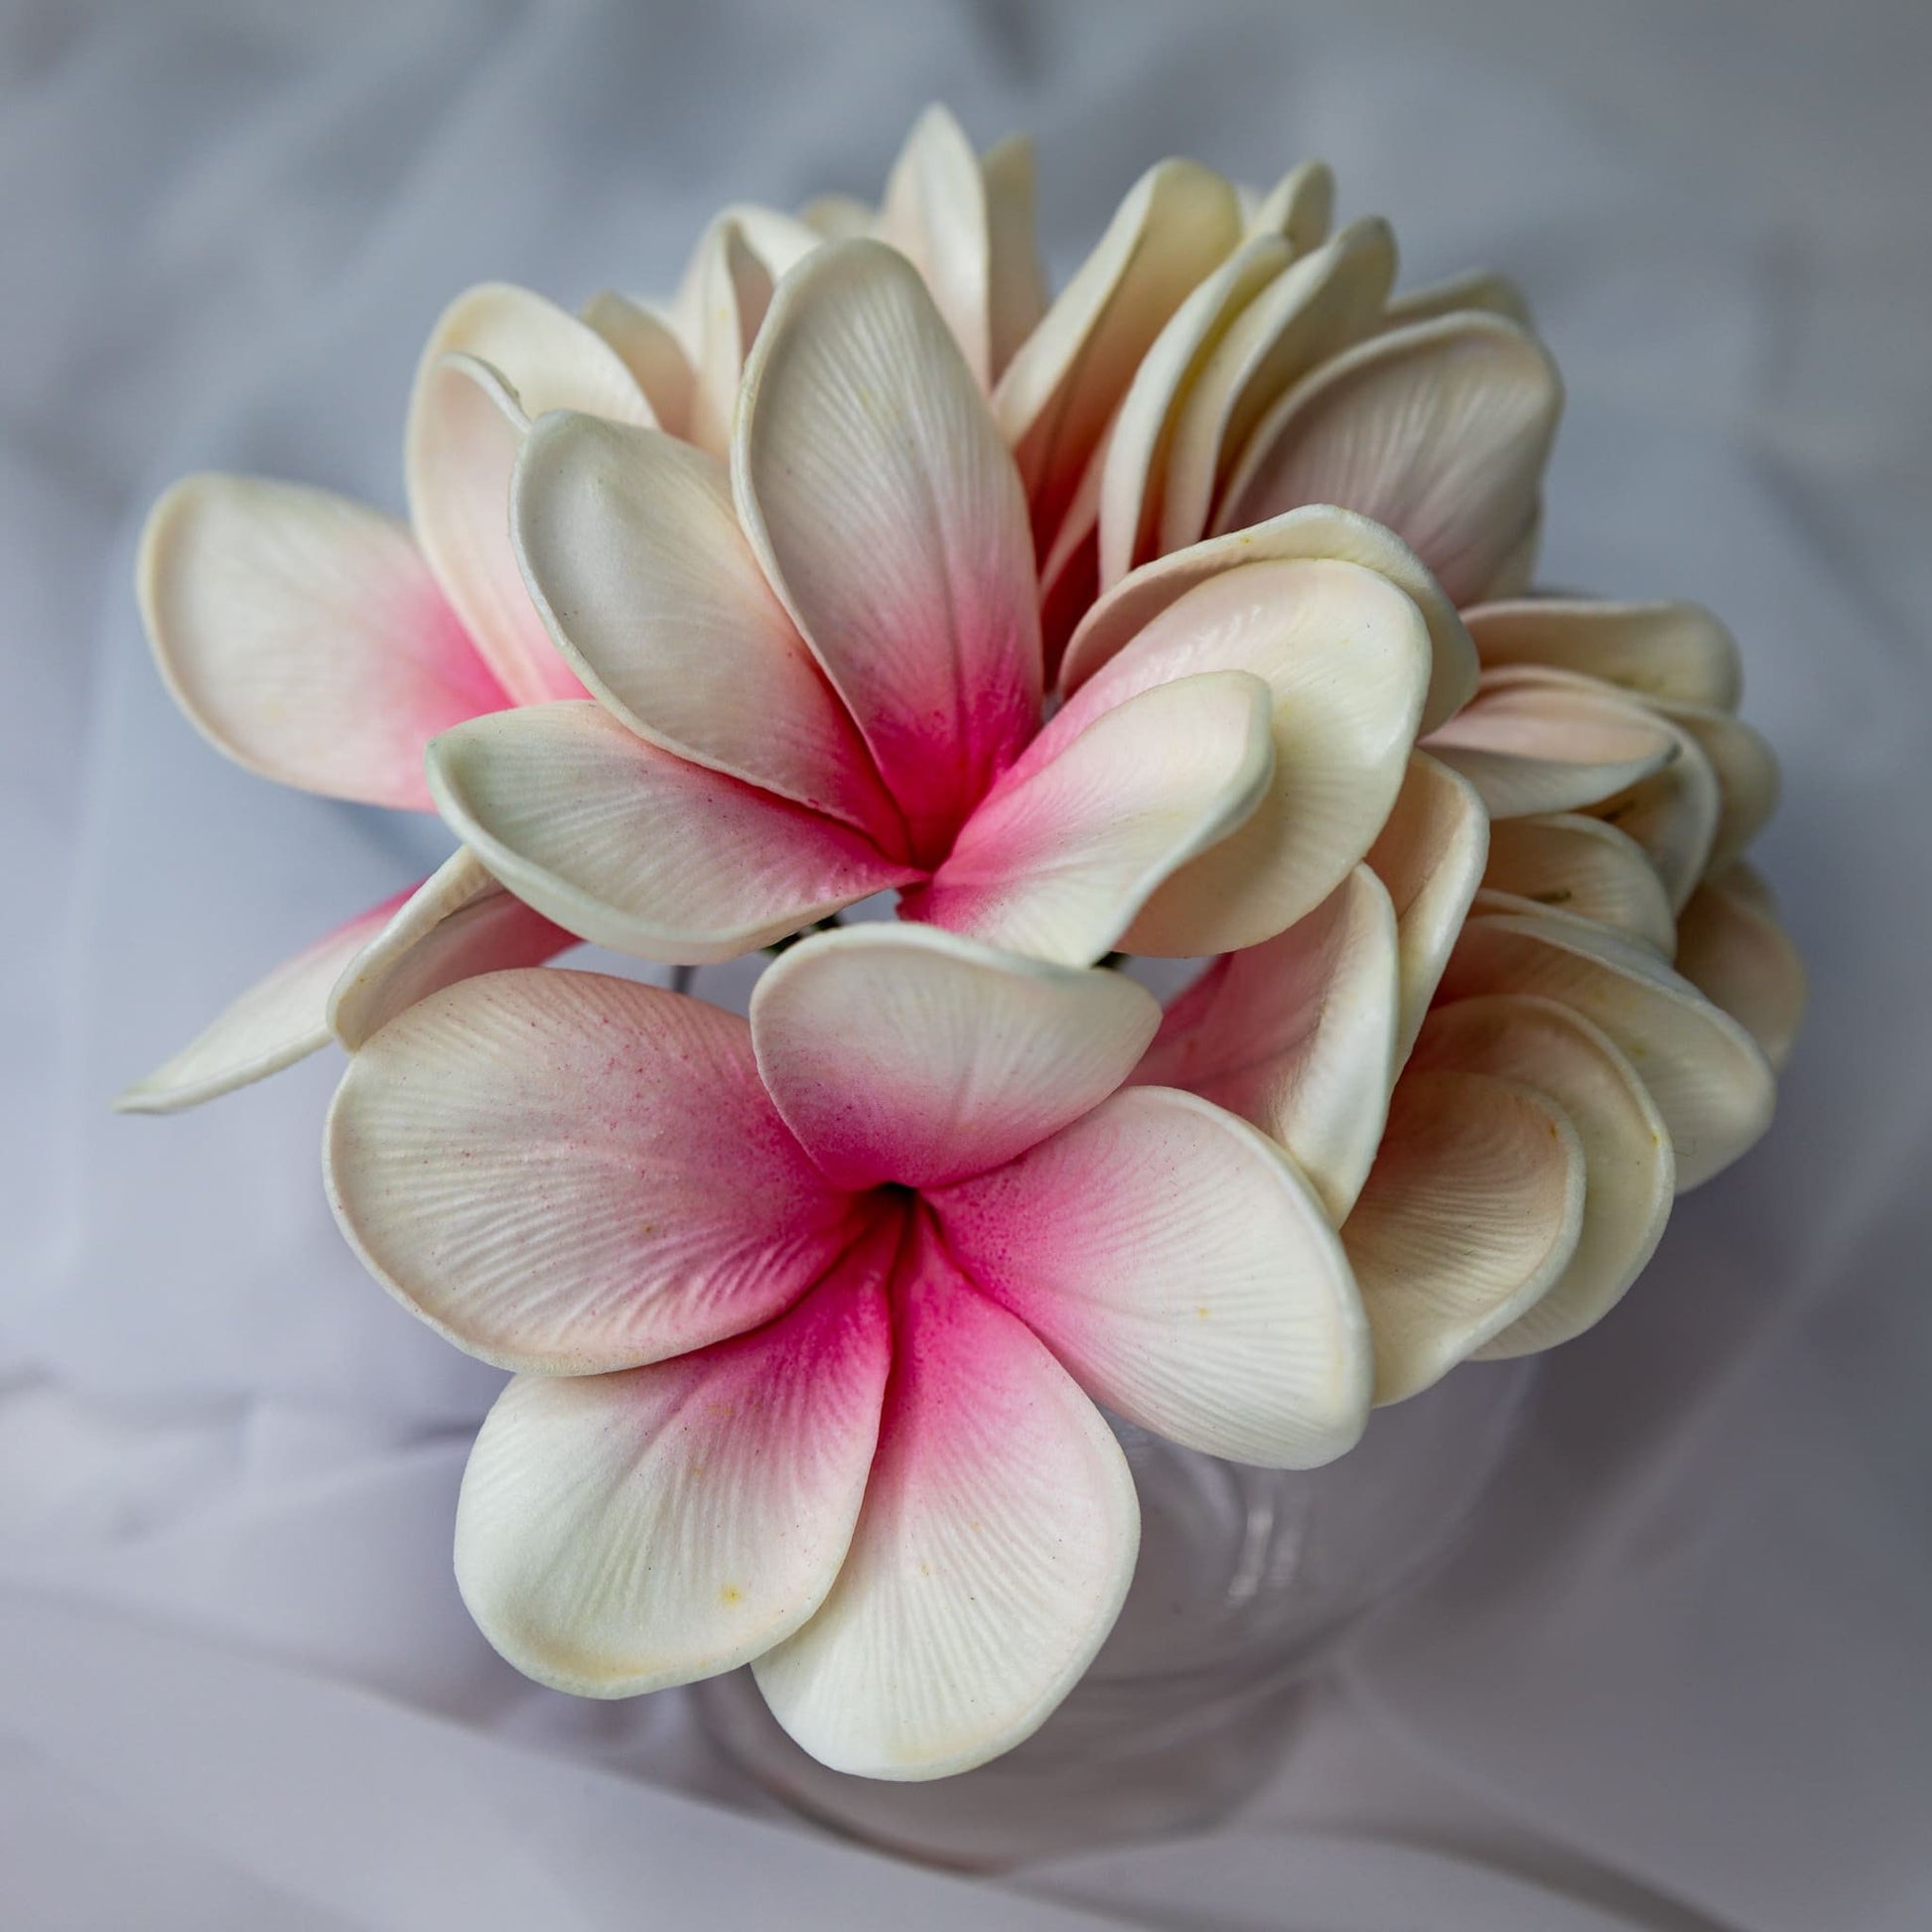 artificial white pink frangipani flowers placed in transparent glass vase